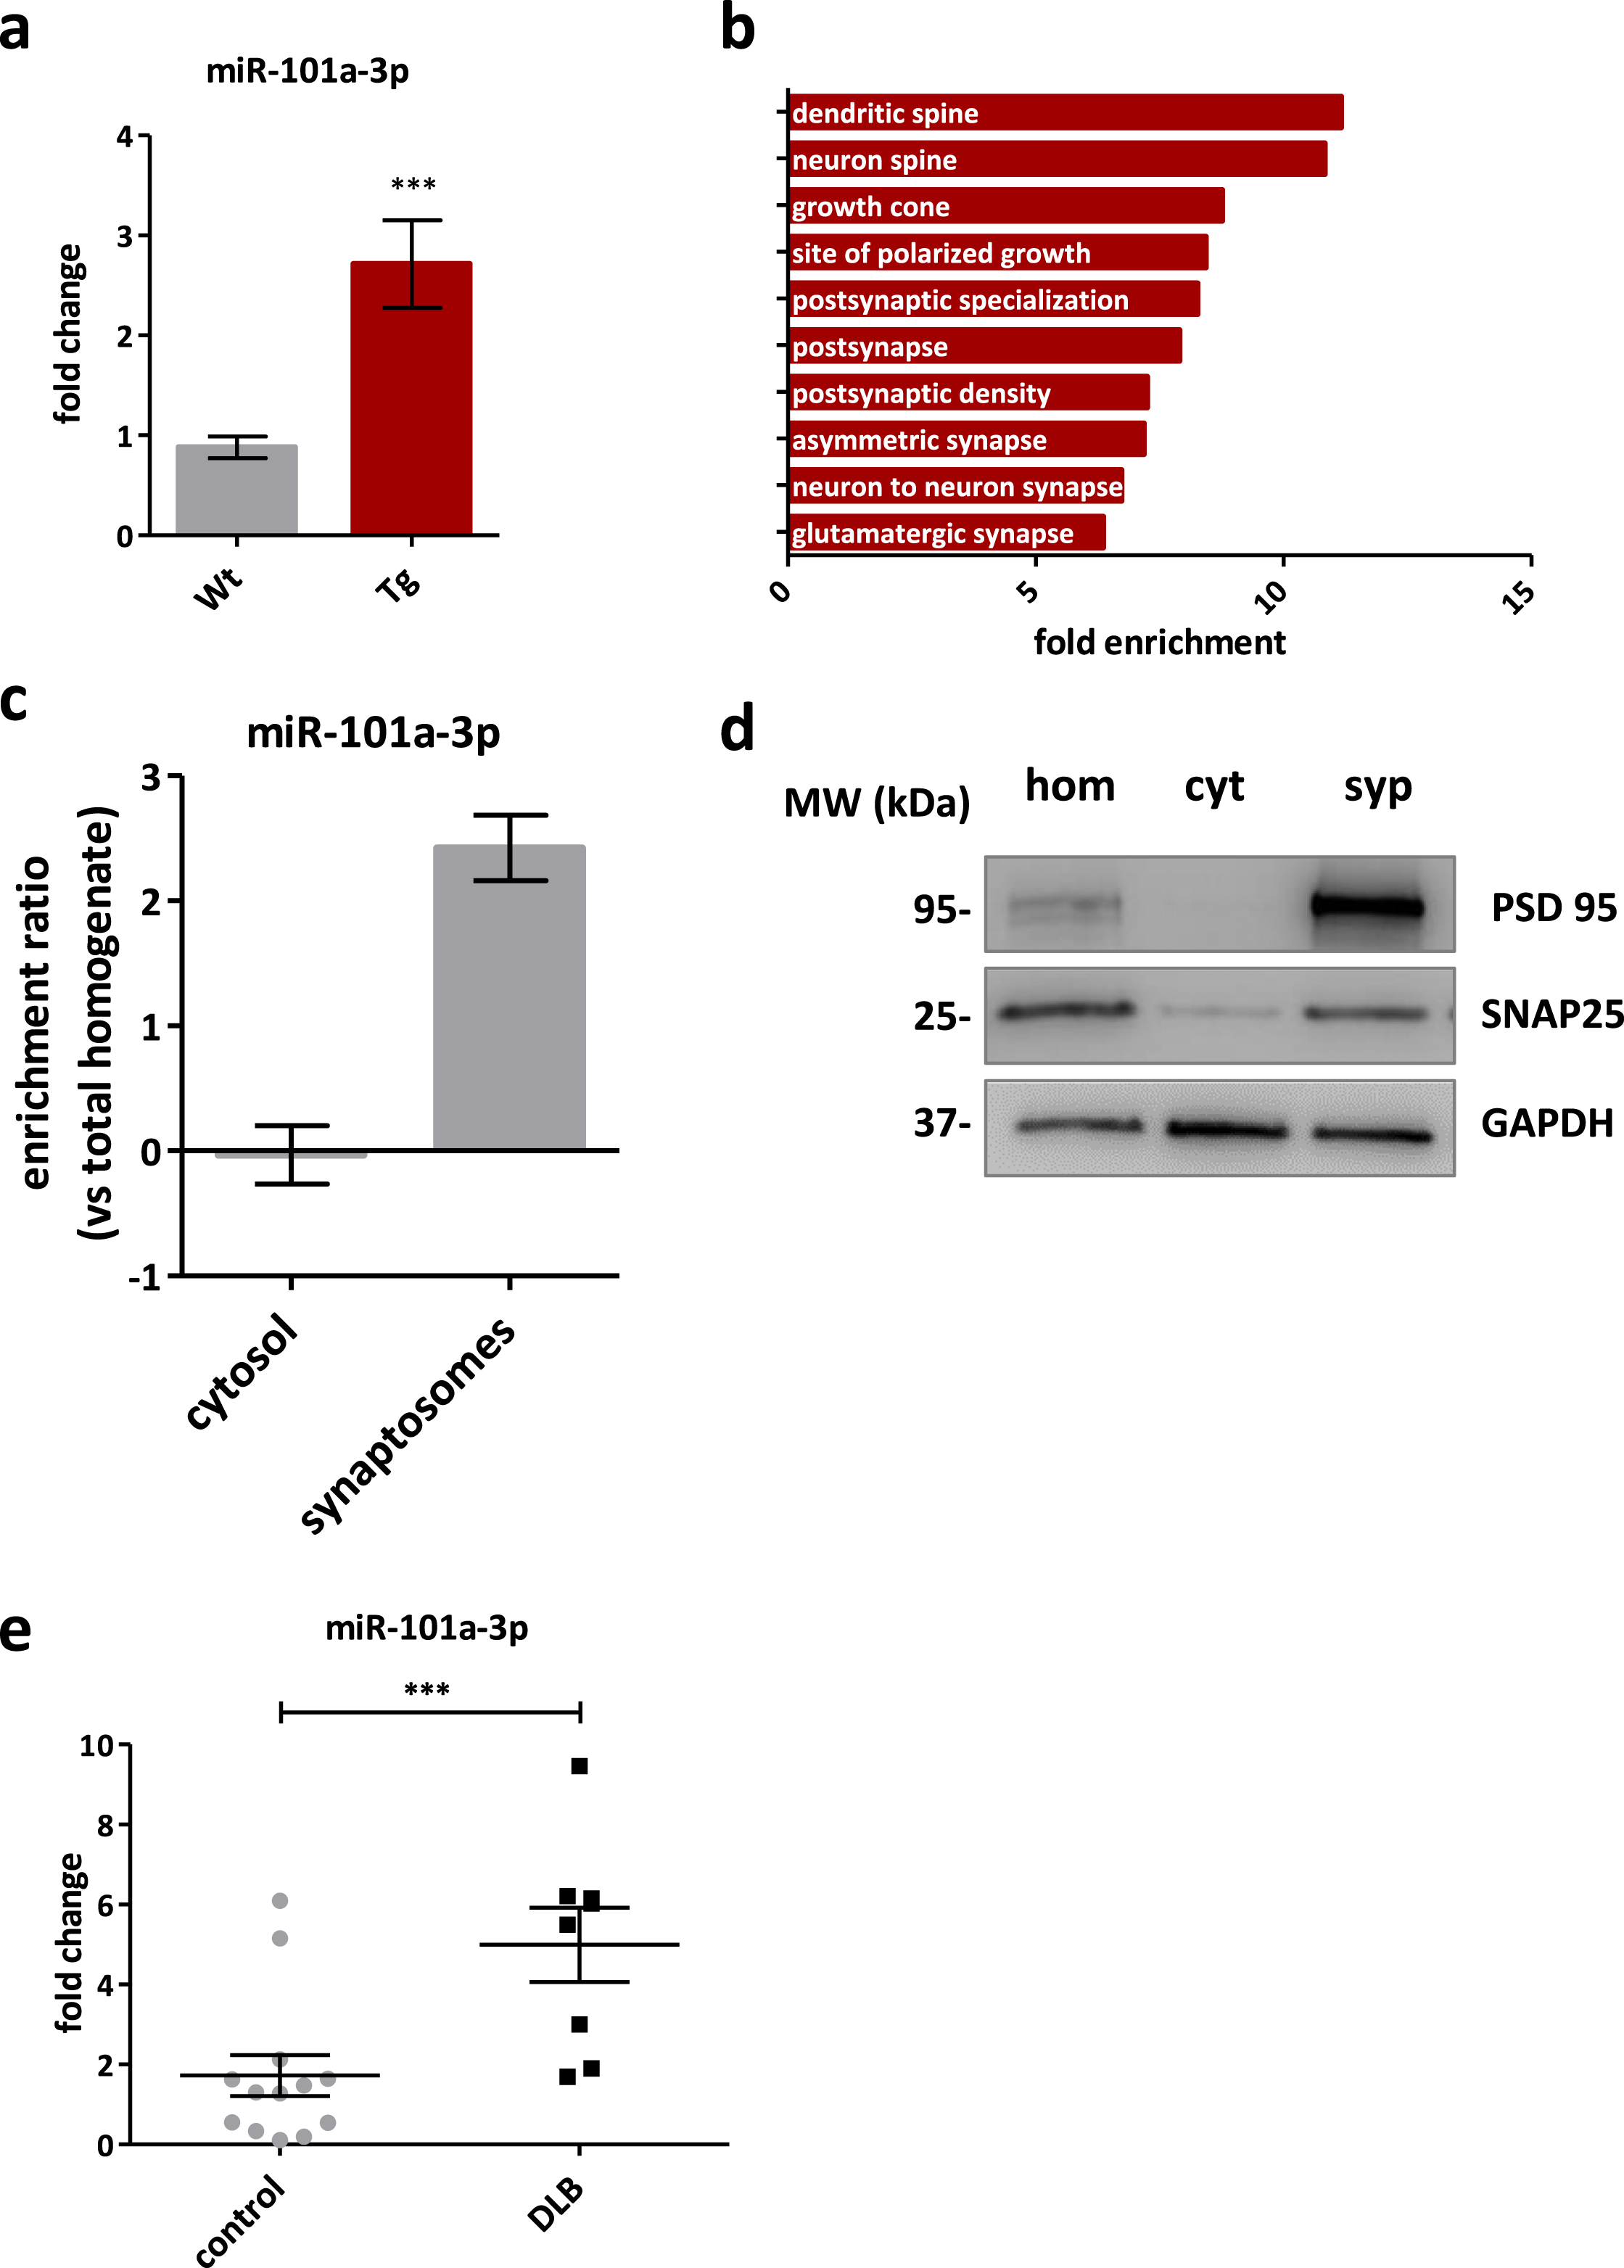 miR-101a-3p is a synaptic miRNA dysregulated in PD mouse model and DLB patients. a) Real time qPCR validation of miR-101a-3p levels in Wt (n = 8) and Tg (n = 7) mouse midbrain. b) Fold enrichment of overrepresented Gene Ontology terms among miR-101a-3p target genes. GAPDH is used for normalization. c) Bar graph of miR-101a-3p enrichment ratio in cytosol and synaptosomes compared to total homogenate. d) Representative immunoblot of synaptic markers in the crude midbrain homogenate (hom), cytosolic fraction (cyt) and purified synaptosomes (syp) used for miRNA assessment e. miR-101a-3p levels quantified by real-time qPCR in cortex of 8 DLB patients and 14 control samples of healthy individuals.; All data are expressed as mean±SEM; Student’s t-test; *p < 0.05, **p < 0.01, ***p < 0.001).